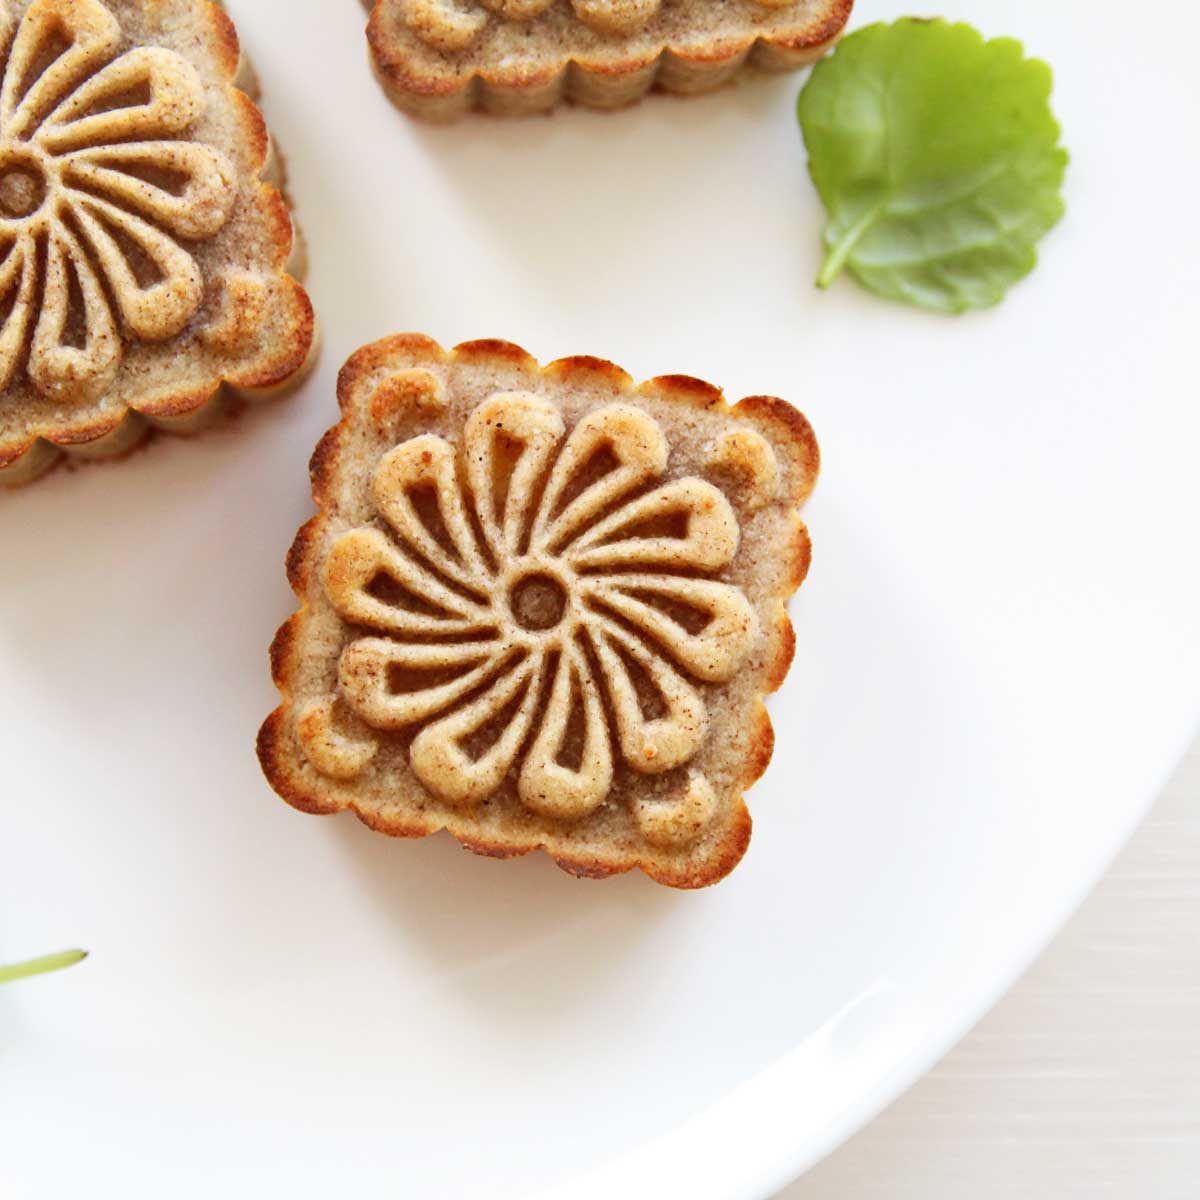 Baked Almond Flour Mooncakes with Easy Cheesecake Filling - almond flour mooncakes